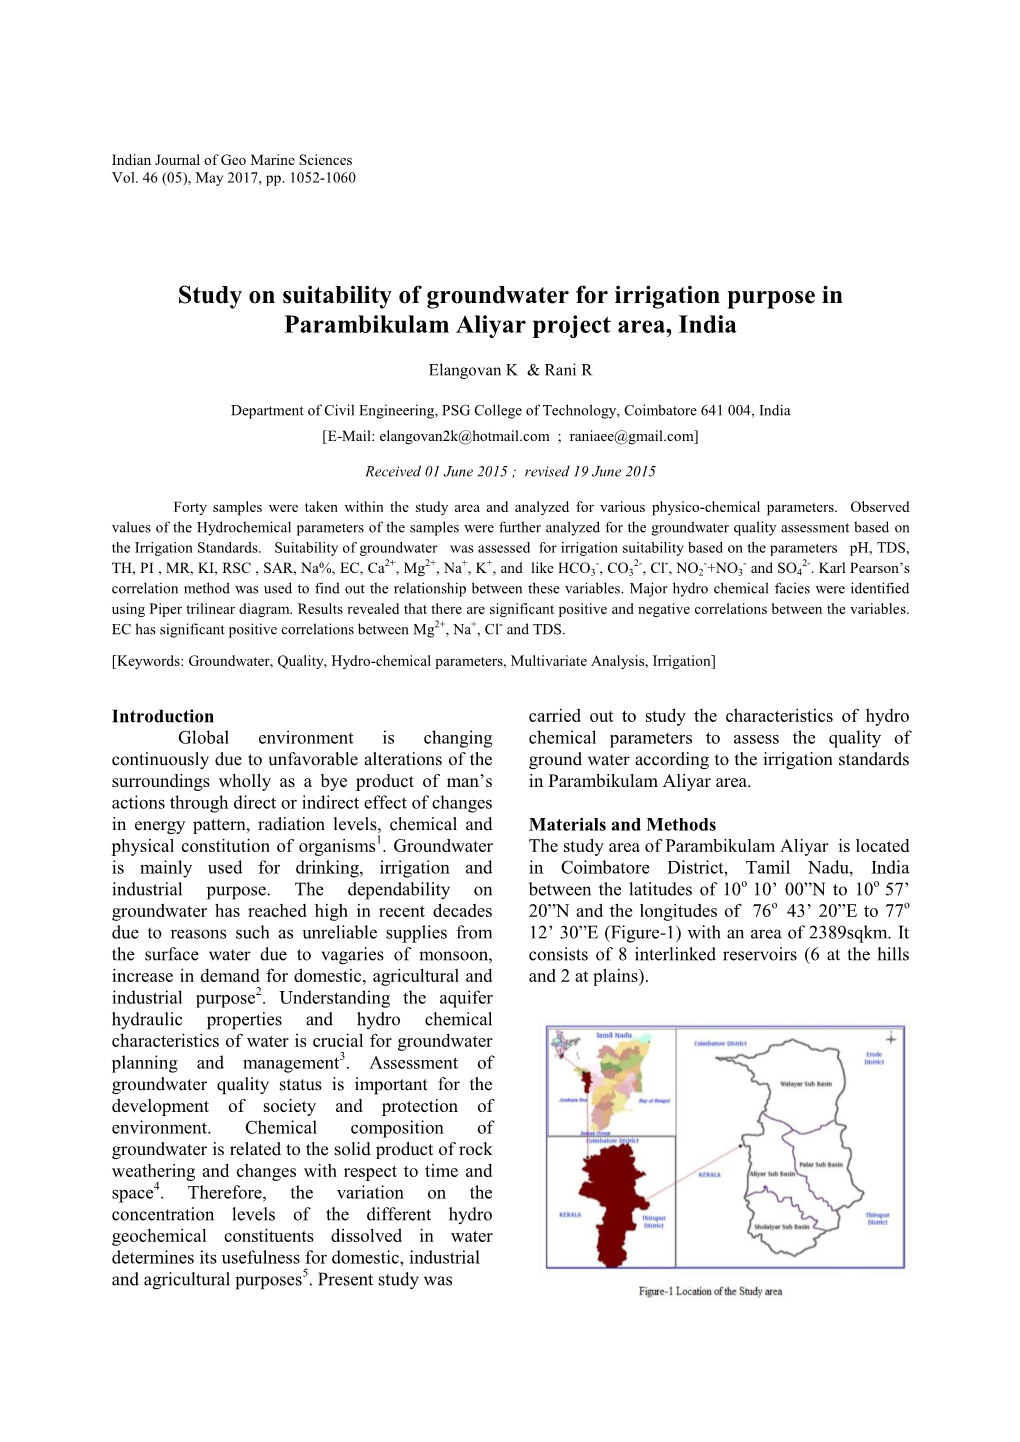 Study on Suitability of Groundwater for Irrigation Purpose in Parambikulam Aliyar Project Area, India